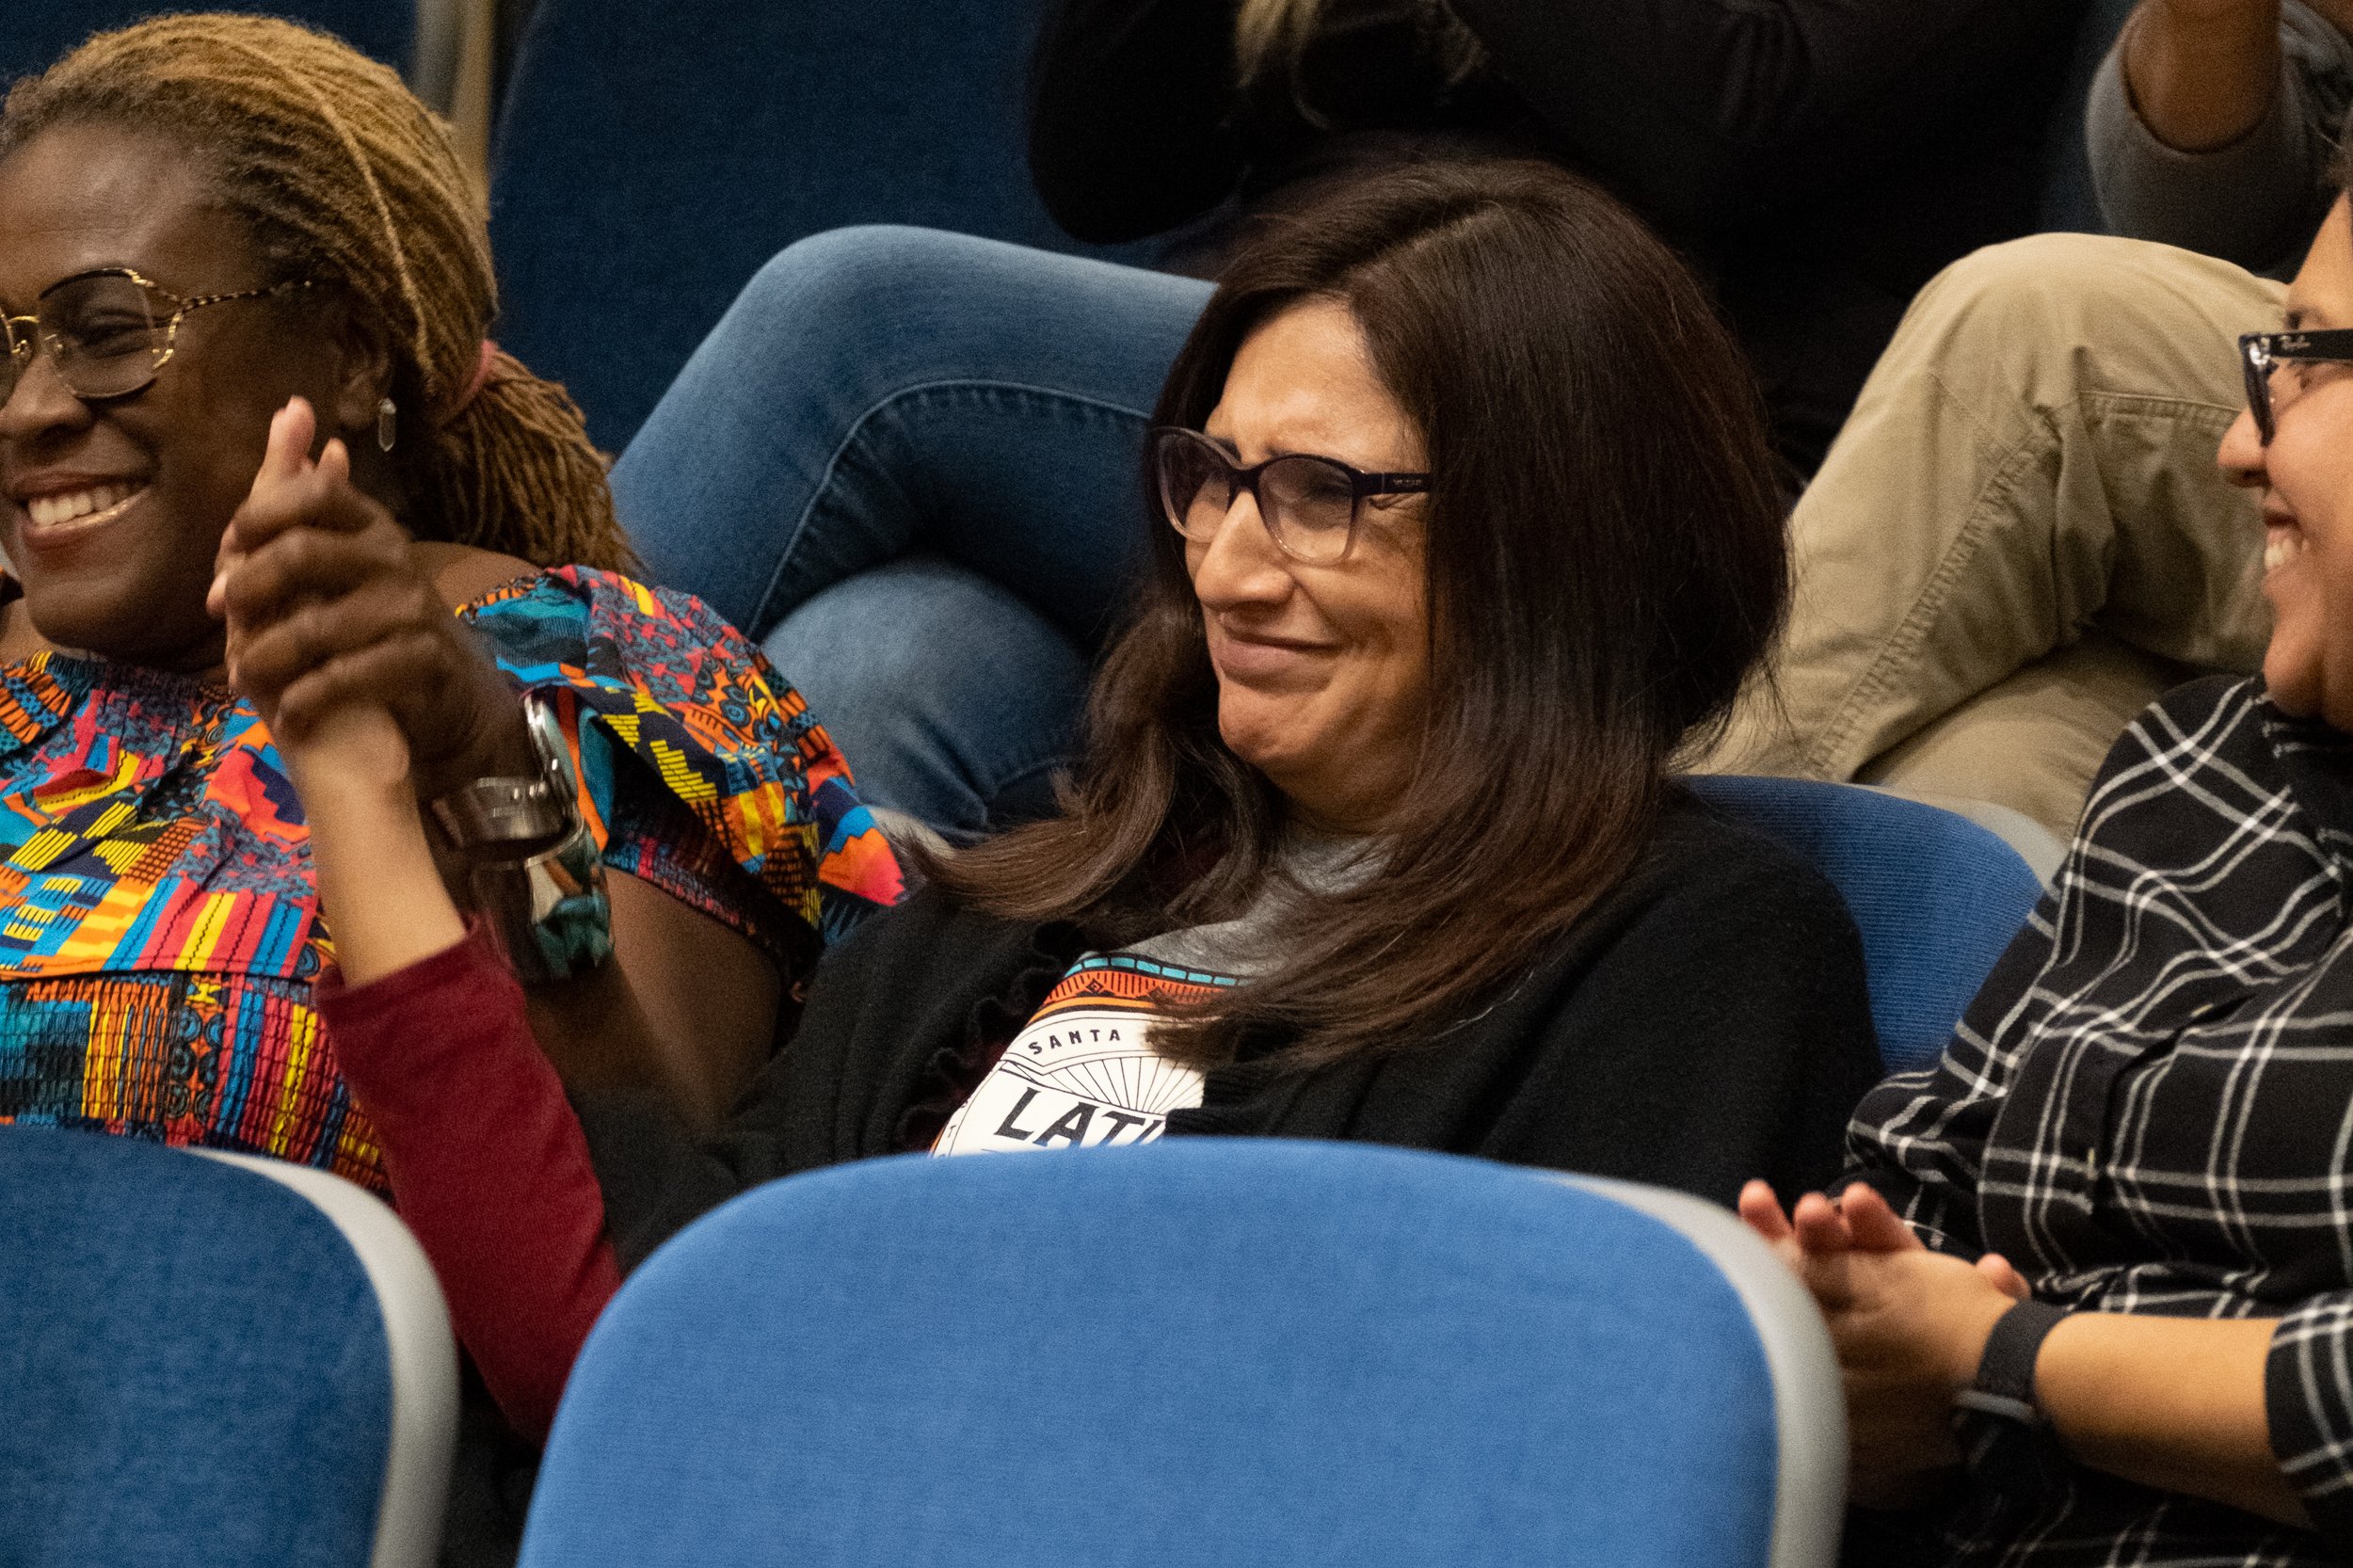  Marisol Moreno, faculty lead for the DREAM resource center, smiles as she is recognized and applauded at the community gathering in lieu of a protest against the play "By The River Rivanna" in the Student Services Orientation Hall on the main campus